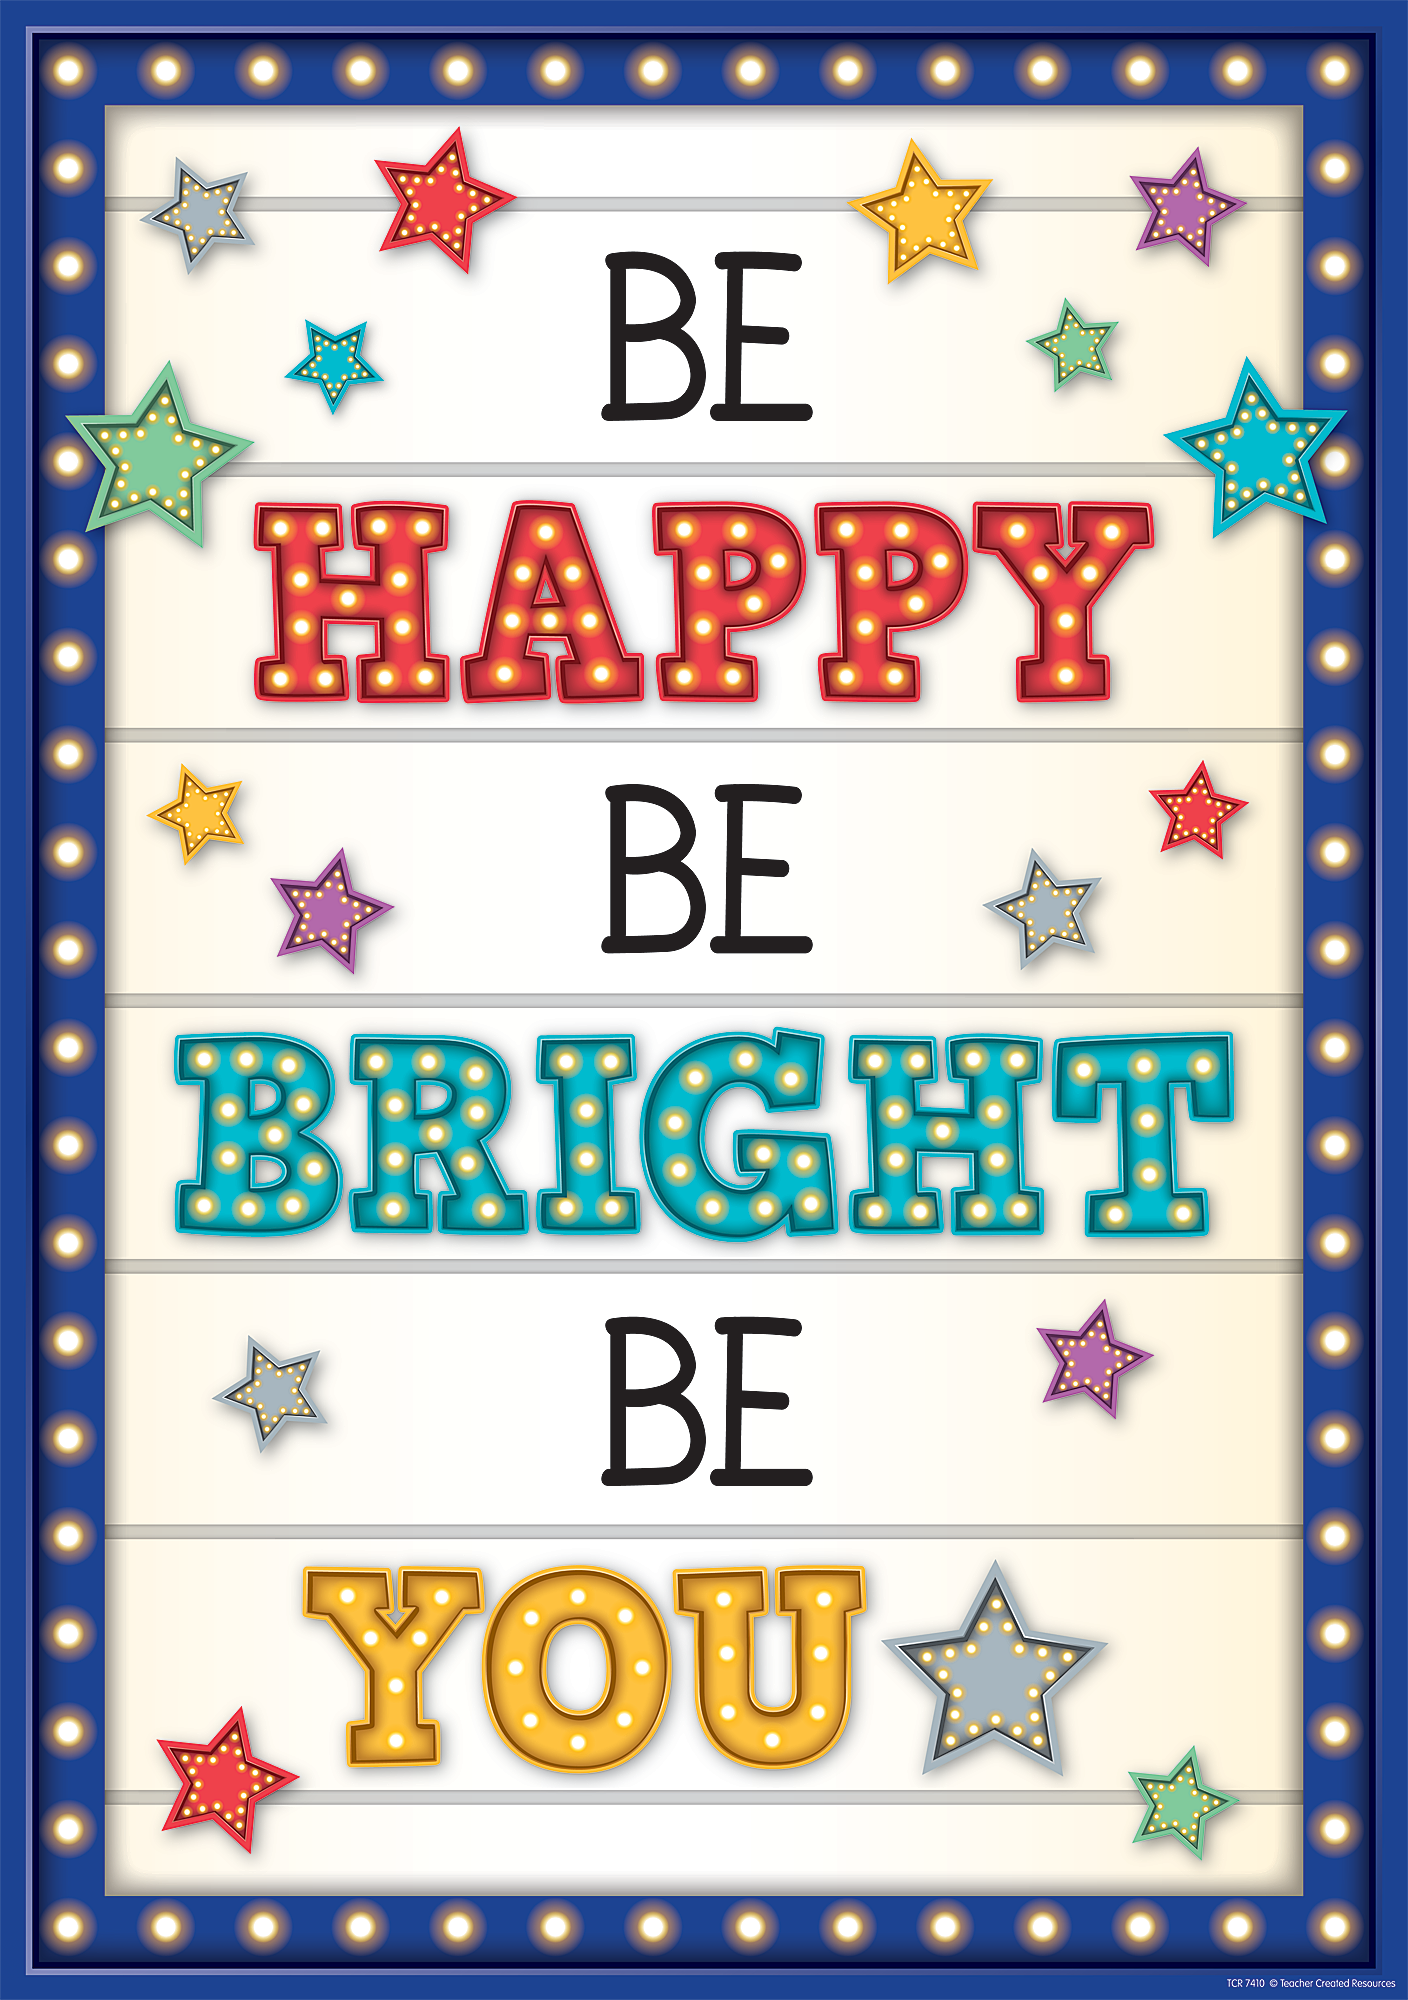 Be Happy, Be Bright, Be You Positive Poster